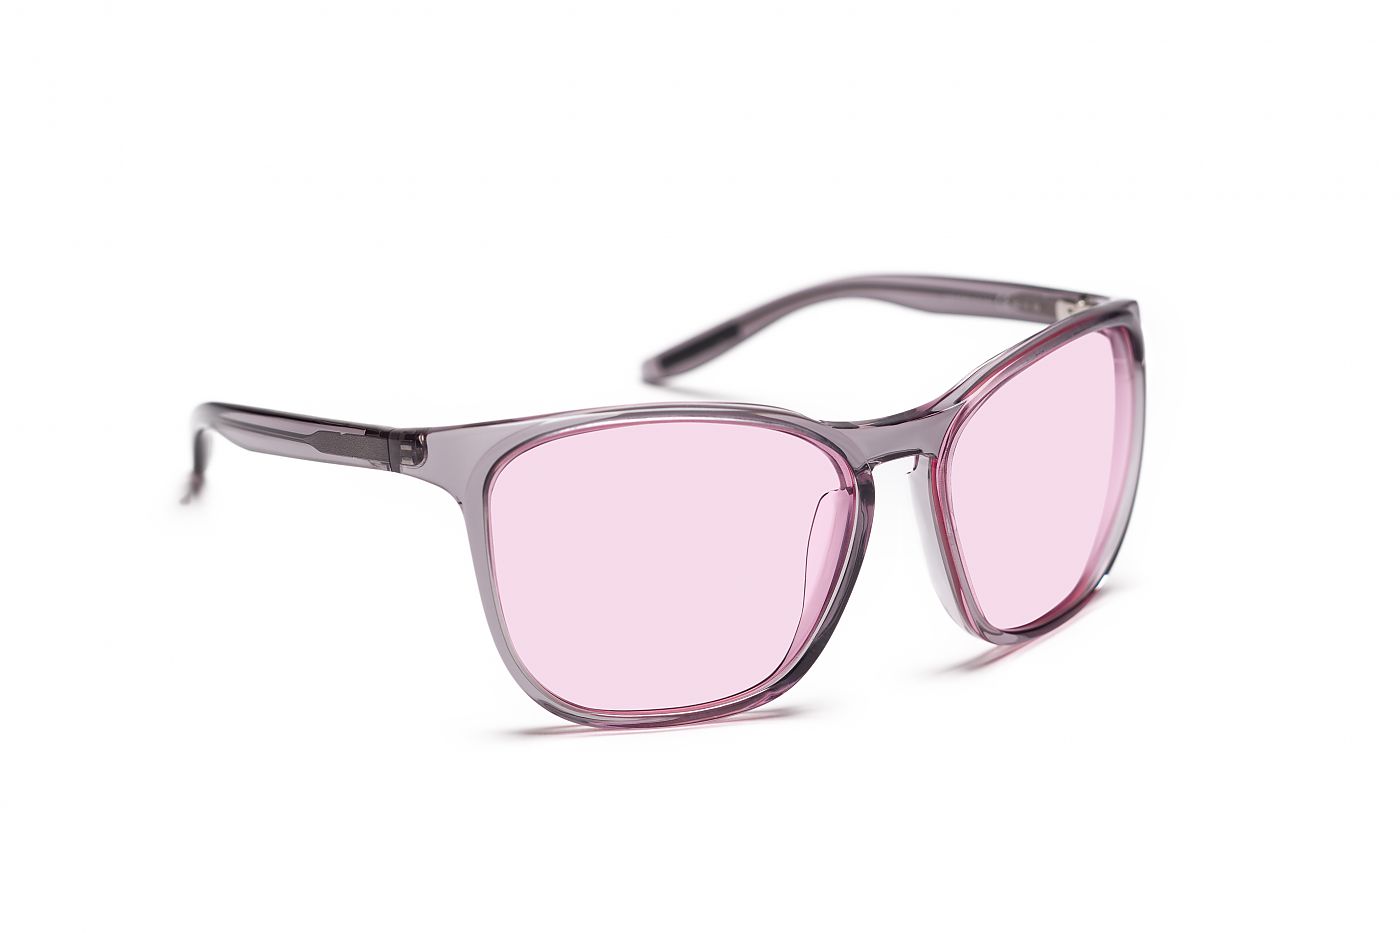 Rapha takes first step into eyewear with Classic Glasses | Bicycle 